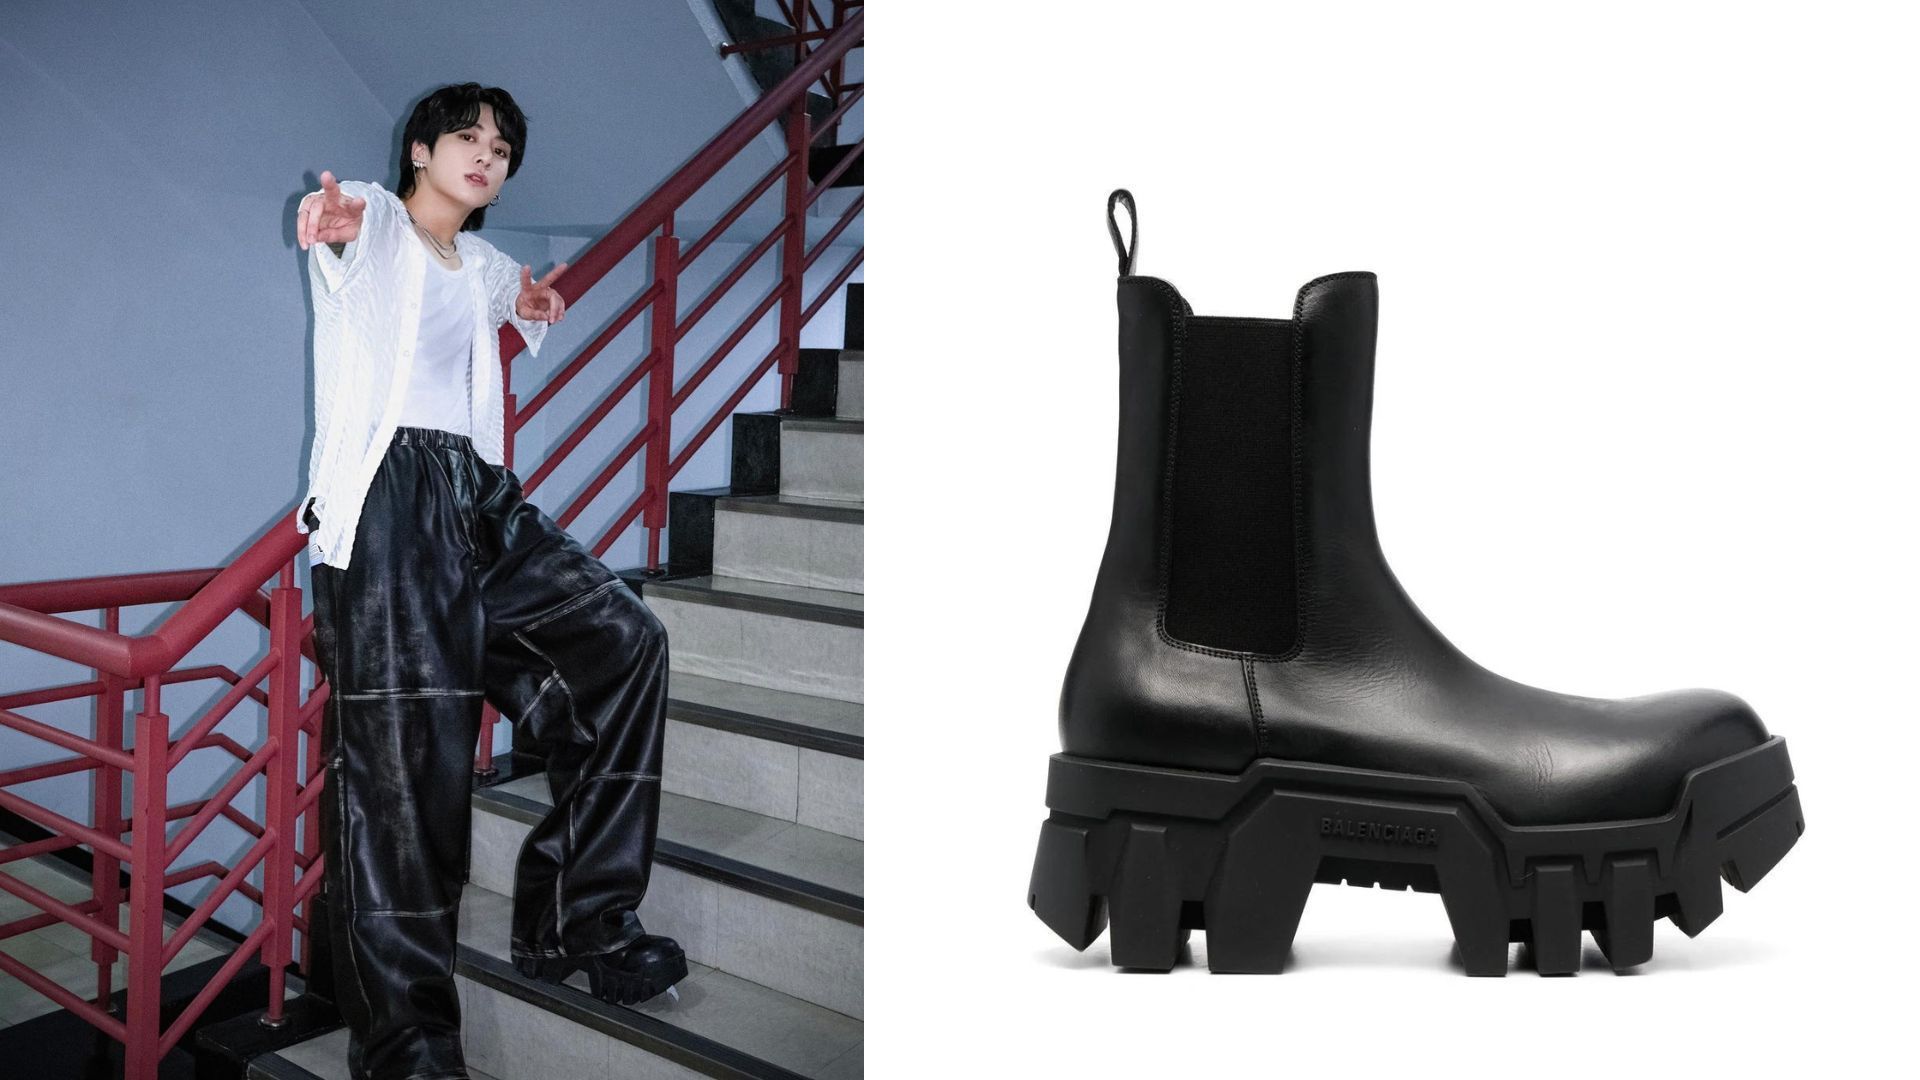 JK expensive footwear collection